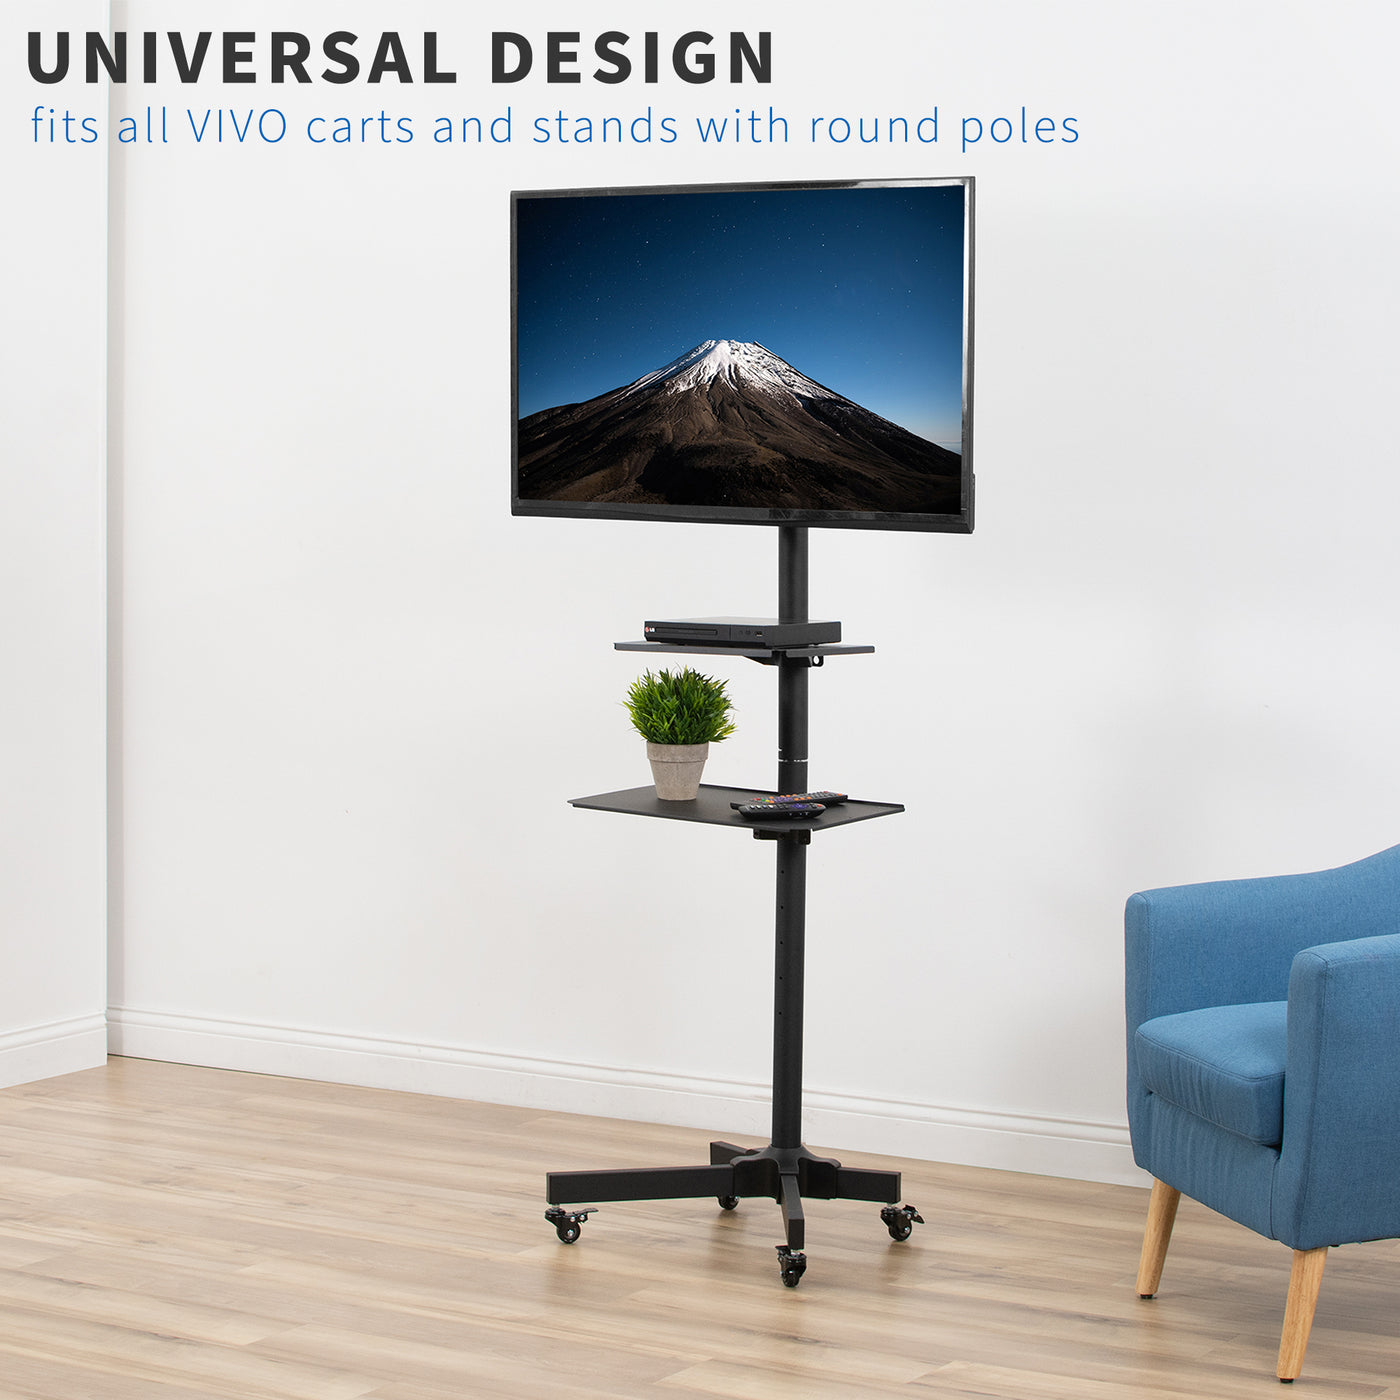 Universal design that can be attached to a variety of poles including TV stand poles.